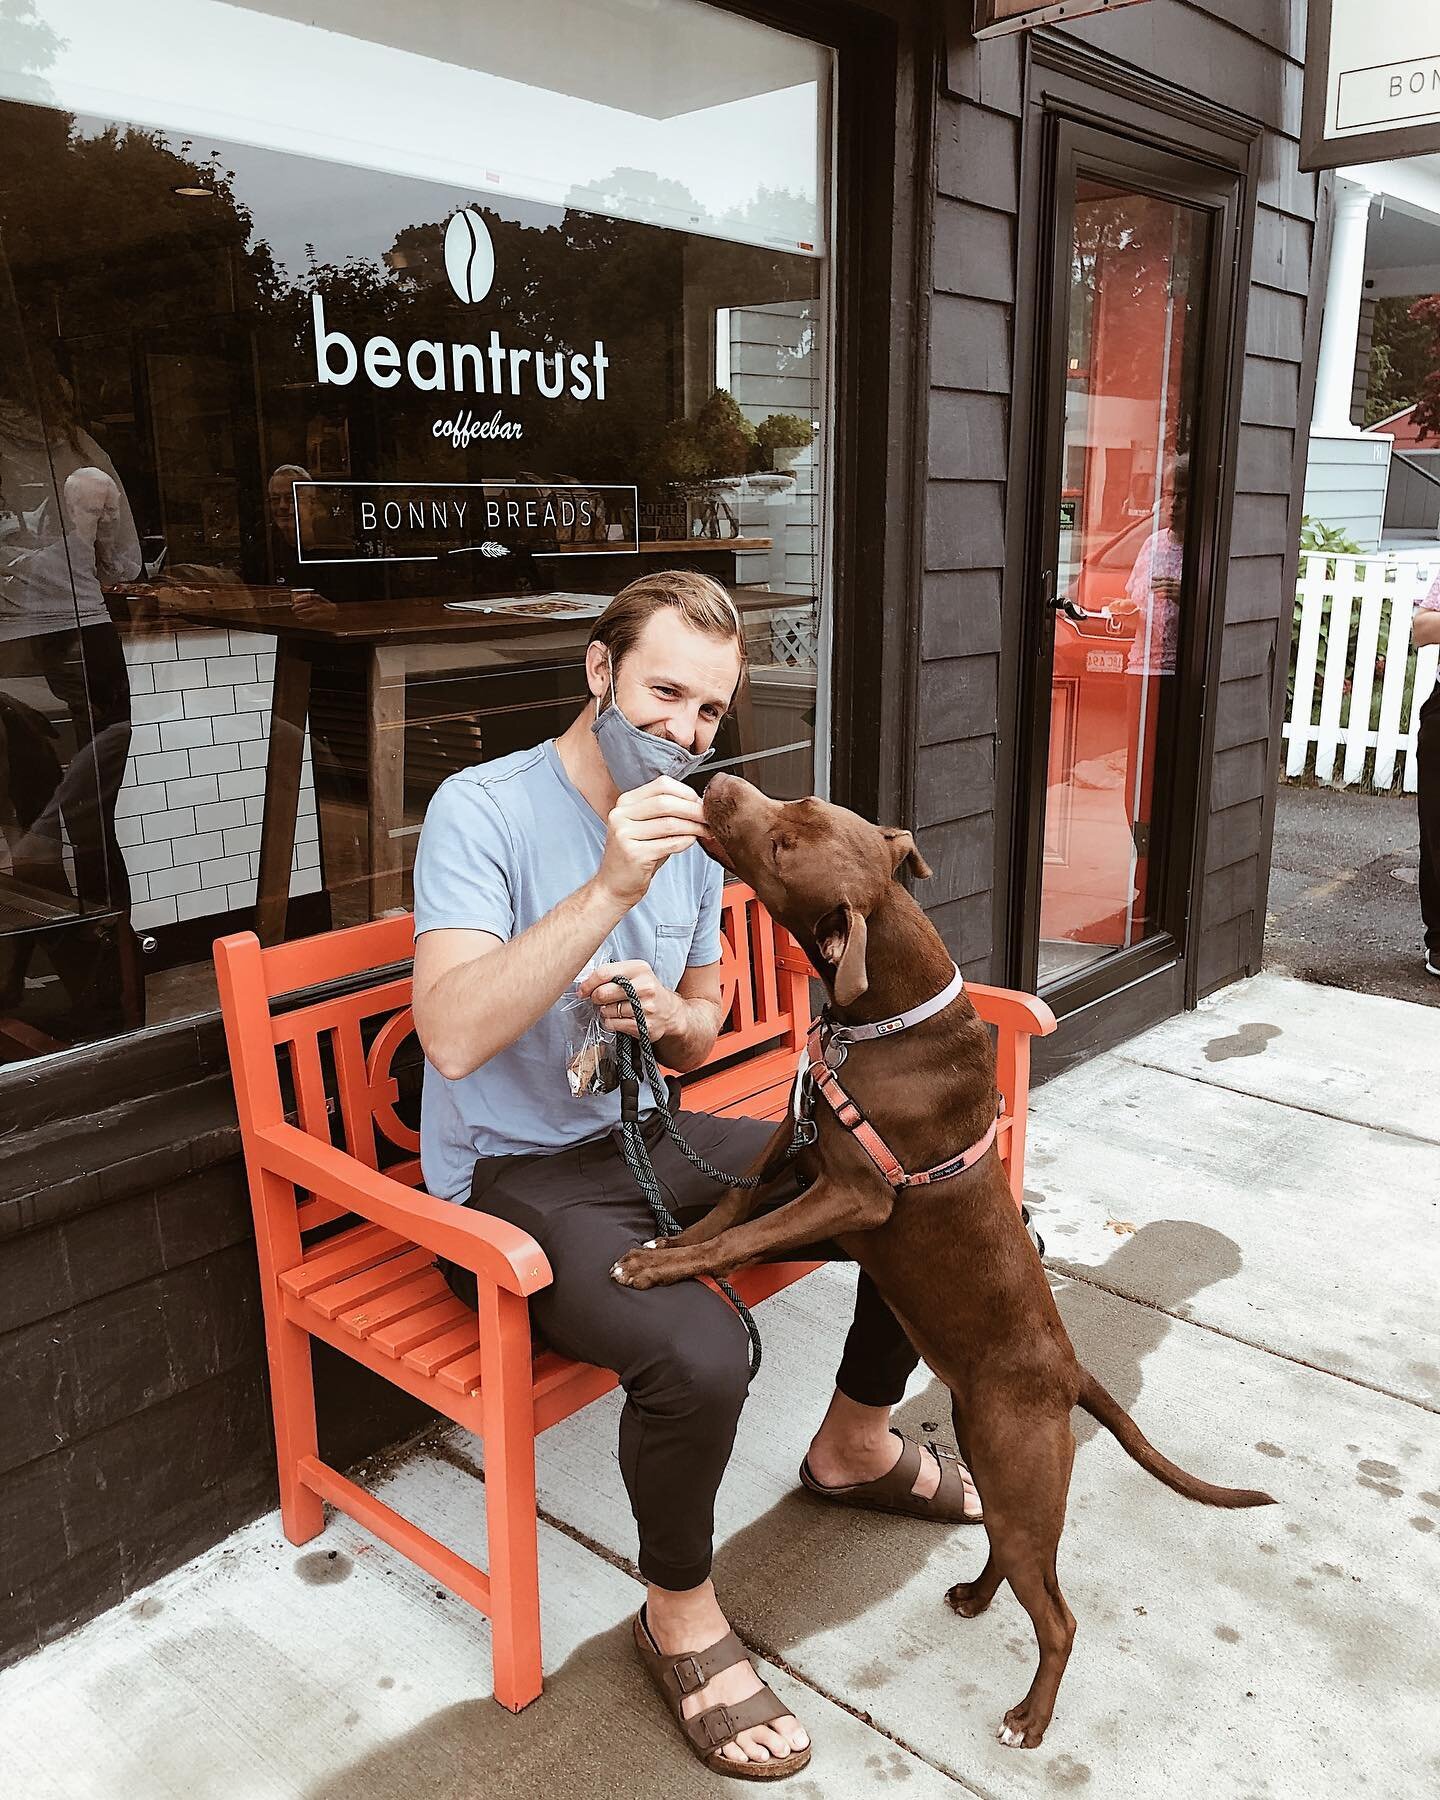 It&rsquo;s a beautiful day in the neighborhood!  Come grab some coffee to go with your sunshine 🌞 

(p.s we always have treats and a fresh bowl of water for our four legged friends!) 

#beantrustcoffeebar #beverlymassachusetts
#beantrustcommunity #b